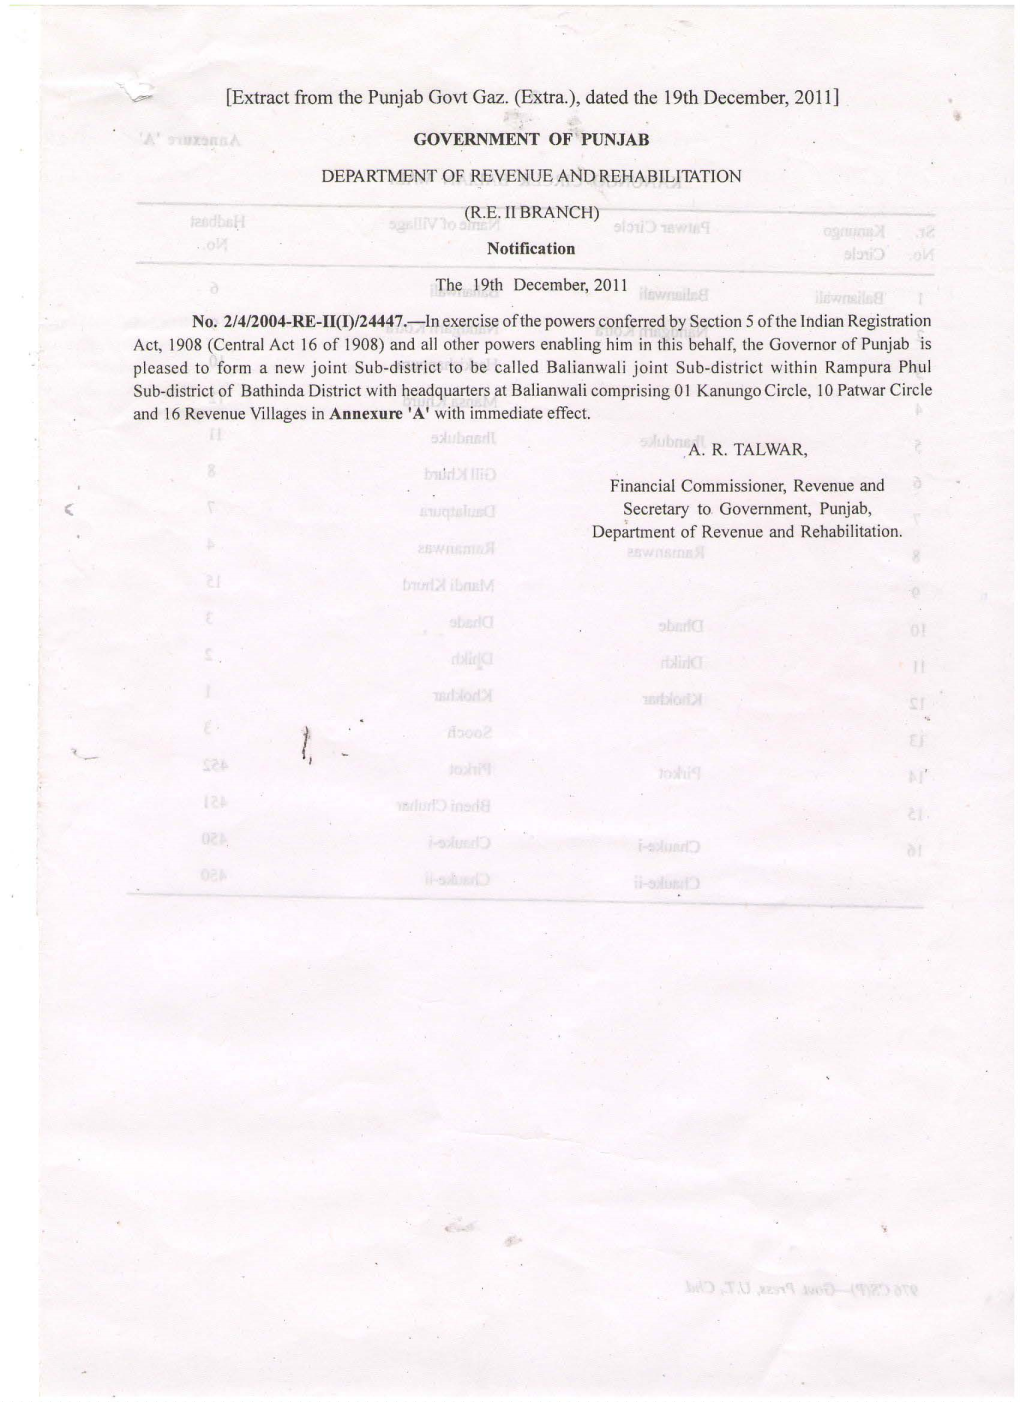 [Extract from the Punjab Govt Gaz. (Extra.), Dated the 19Th December, 2011]